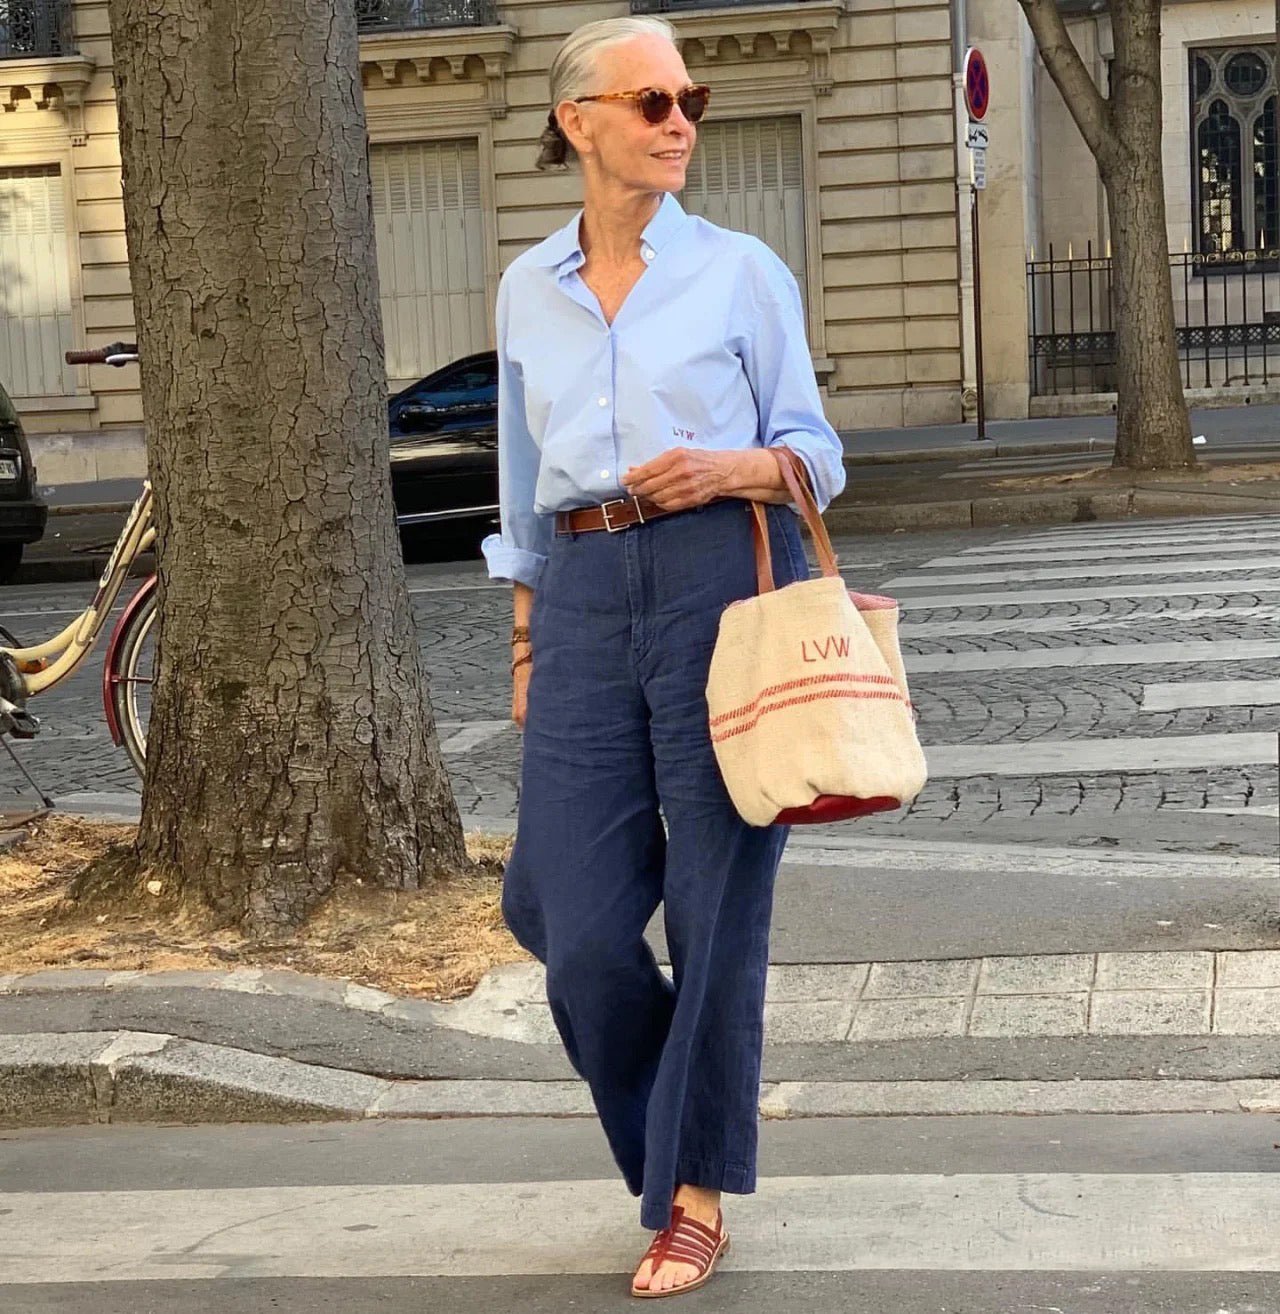 Who said older people can't keep up with fashion? – HanitiiPearls